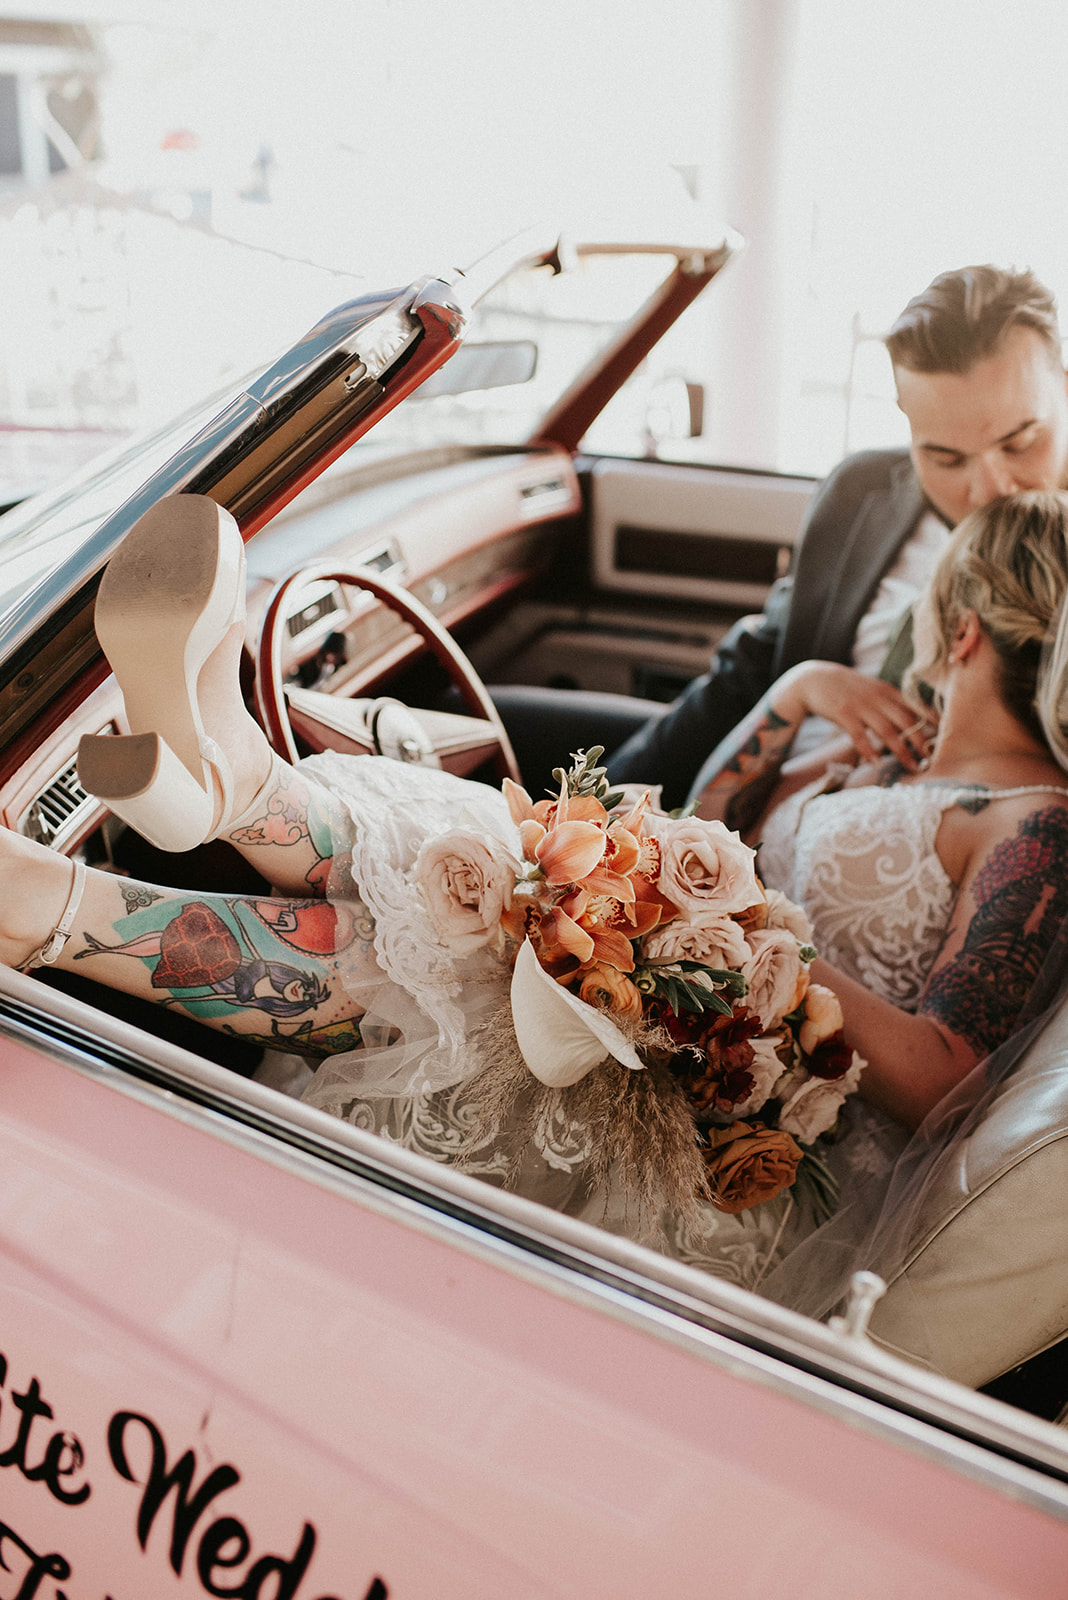 First Stop! A Little White Chapel Bride hangs her feet out of the cute pink Cadillac leaning into her husband. The bride is wearing cute chunky white heals